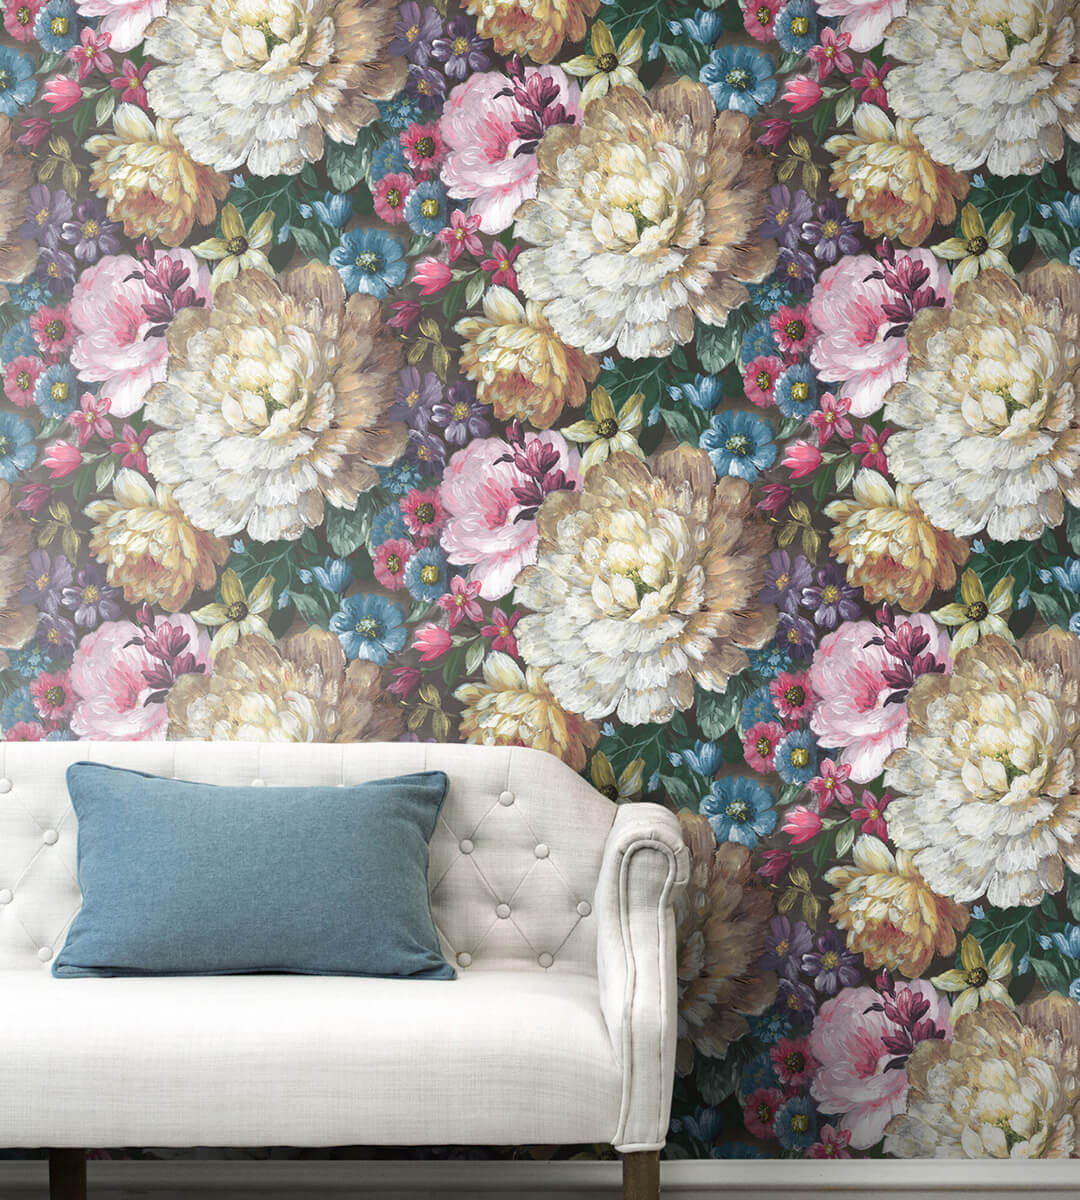 NextWall Blooming Floral Peel & Stick Wallpaper - Multicolored